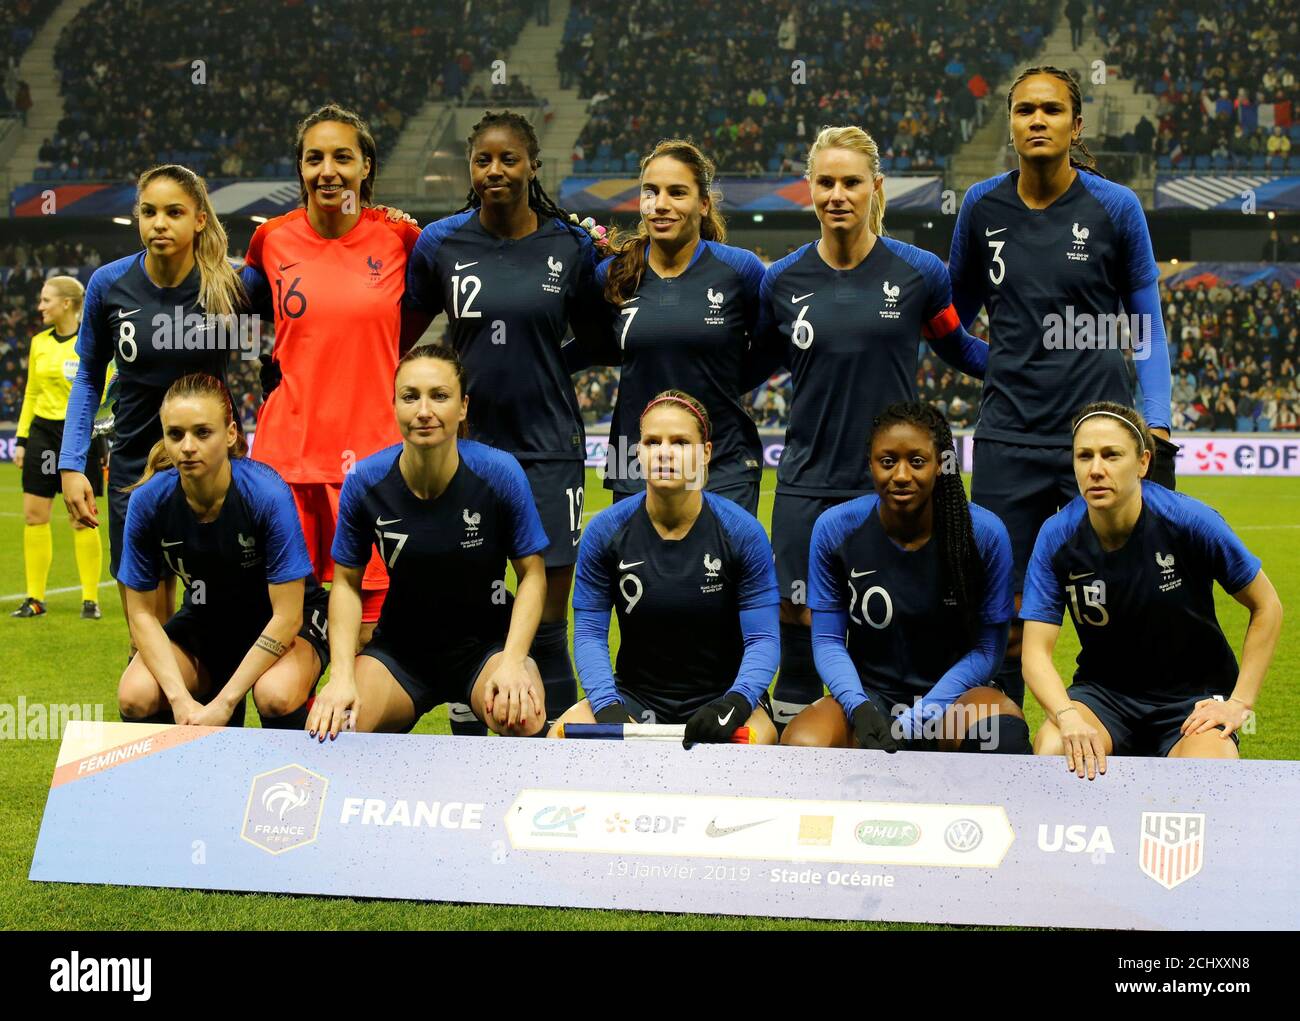 Soccer Football - Women's International Friendly - France v United States -  Stade Oceane, Le Havre, France - January 19, 2019 France team group  REUTERS/Pascal Rossignol Stock Photo - Alamy